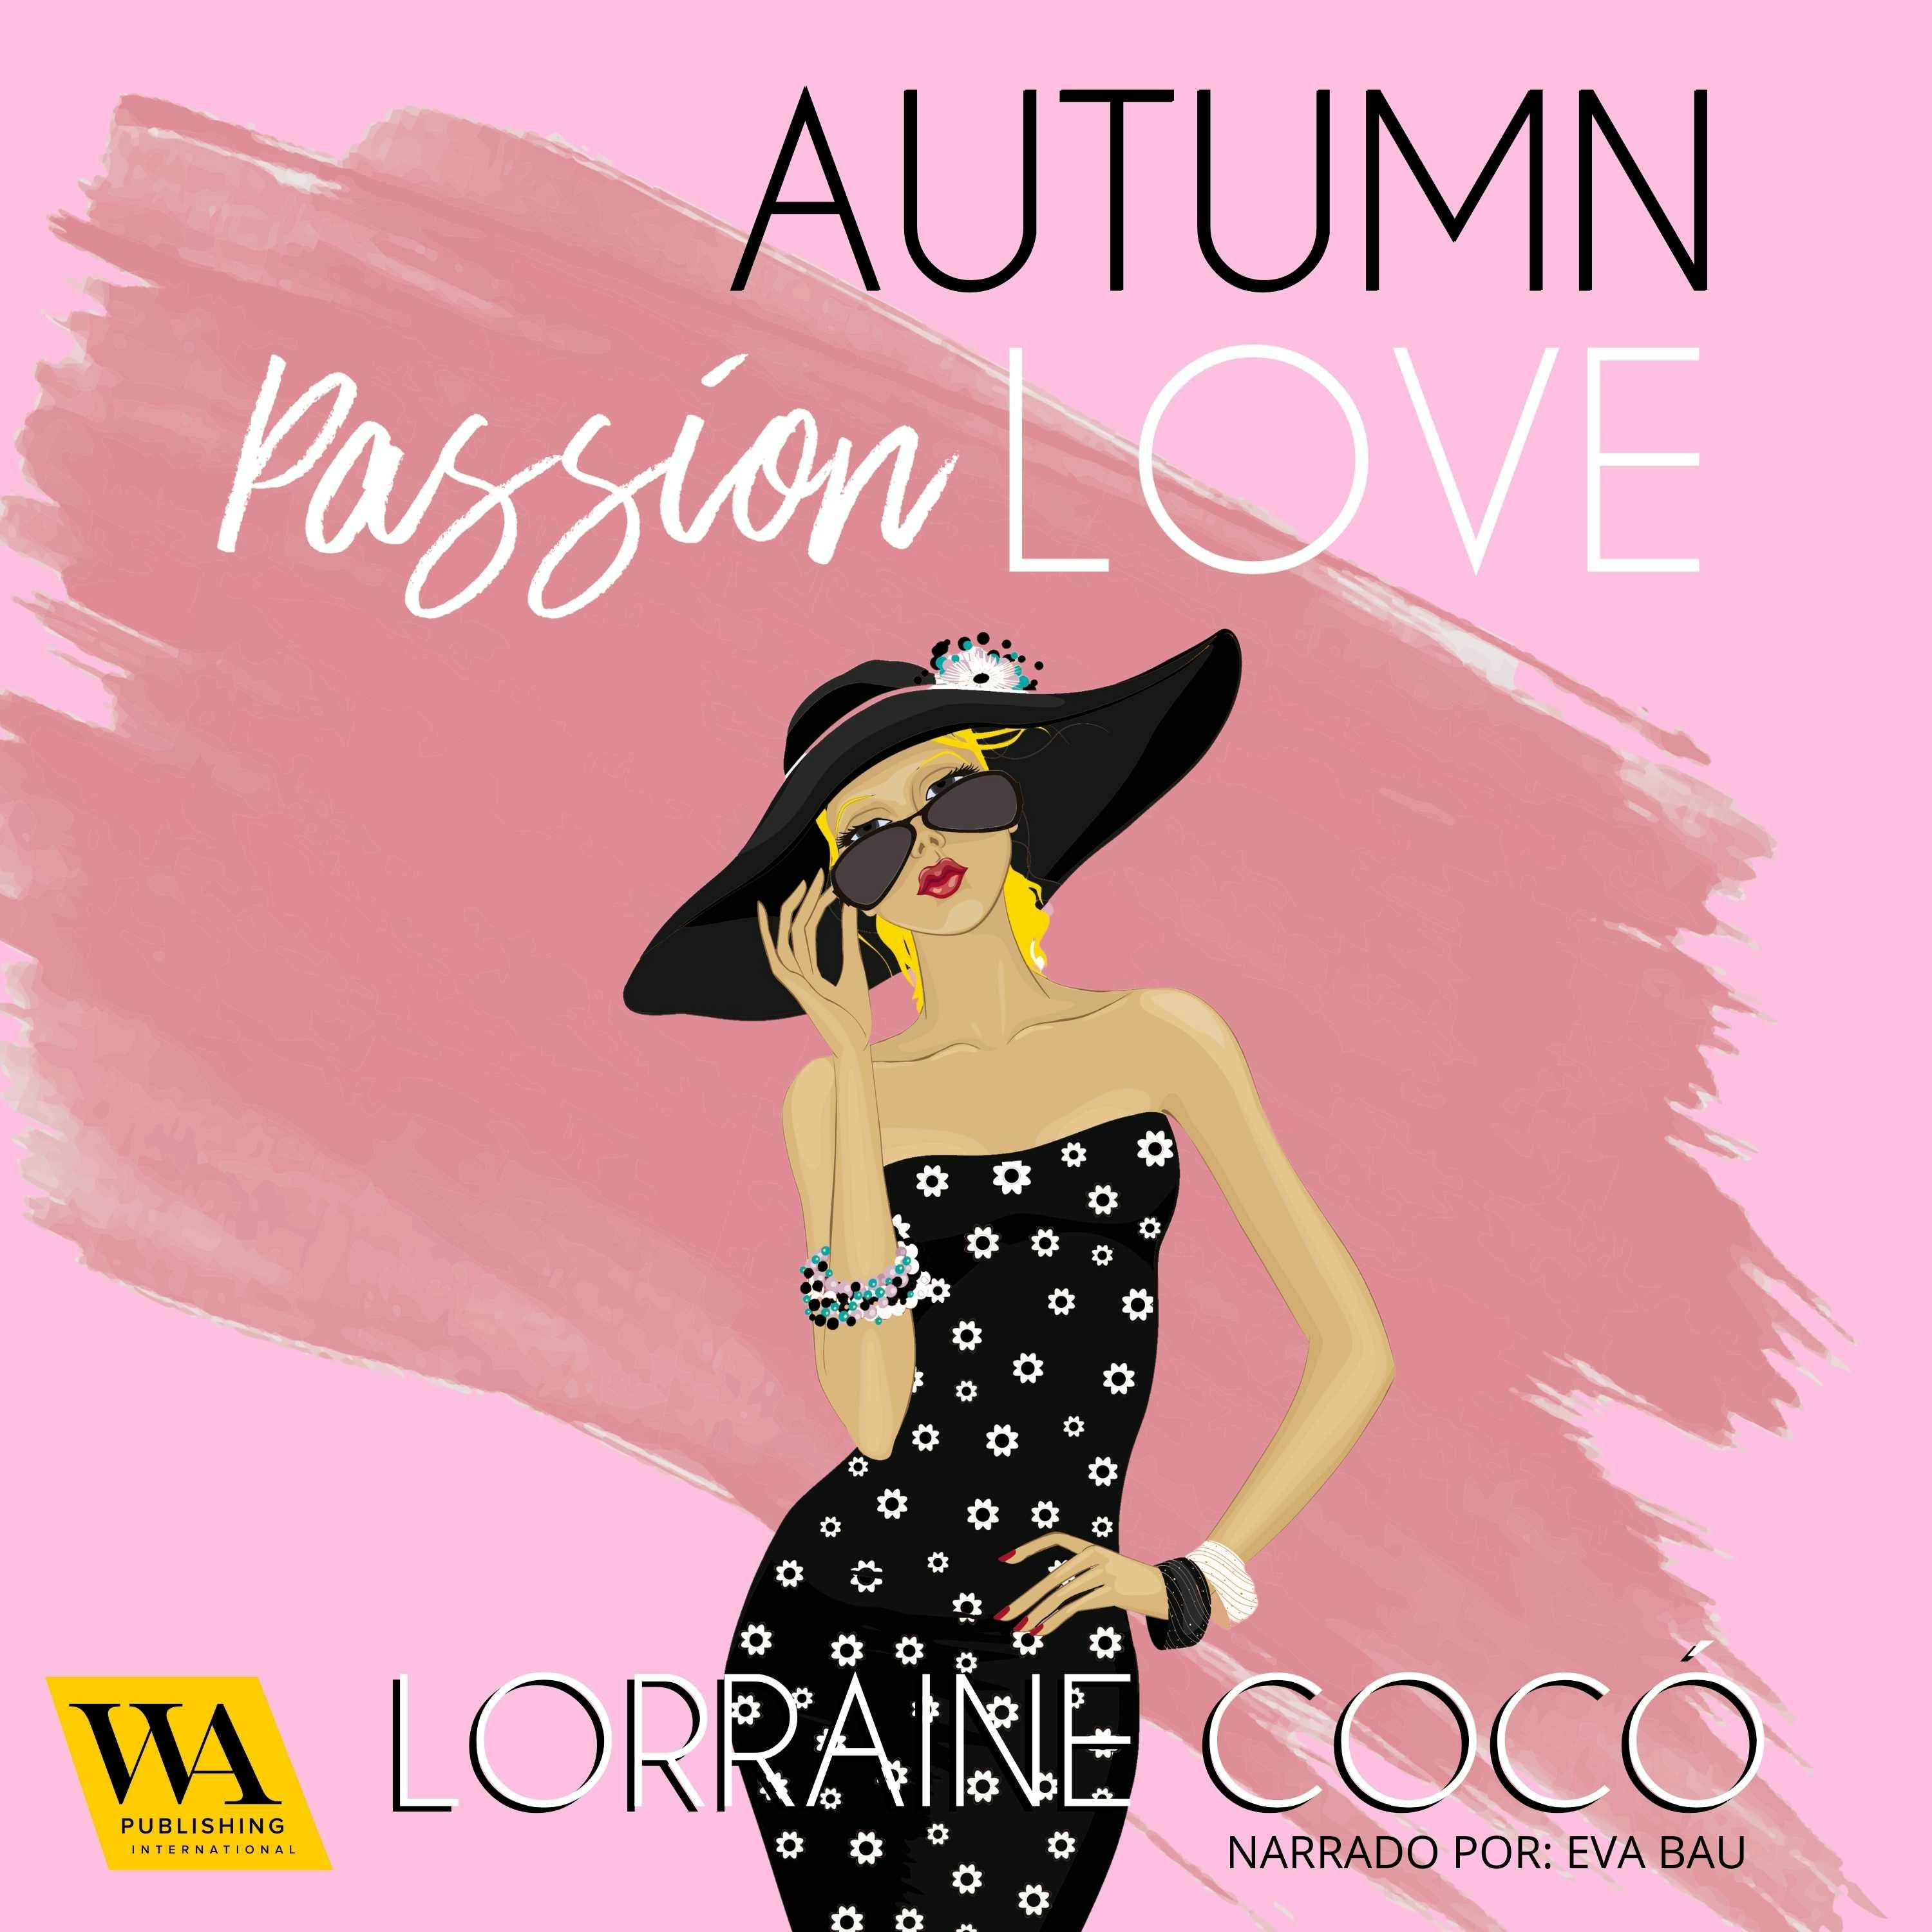 Autumn Passion Love - undefined